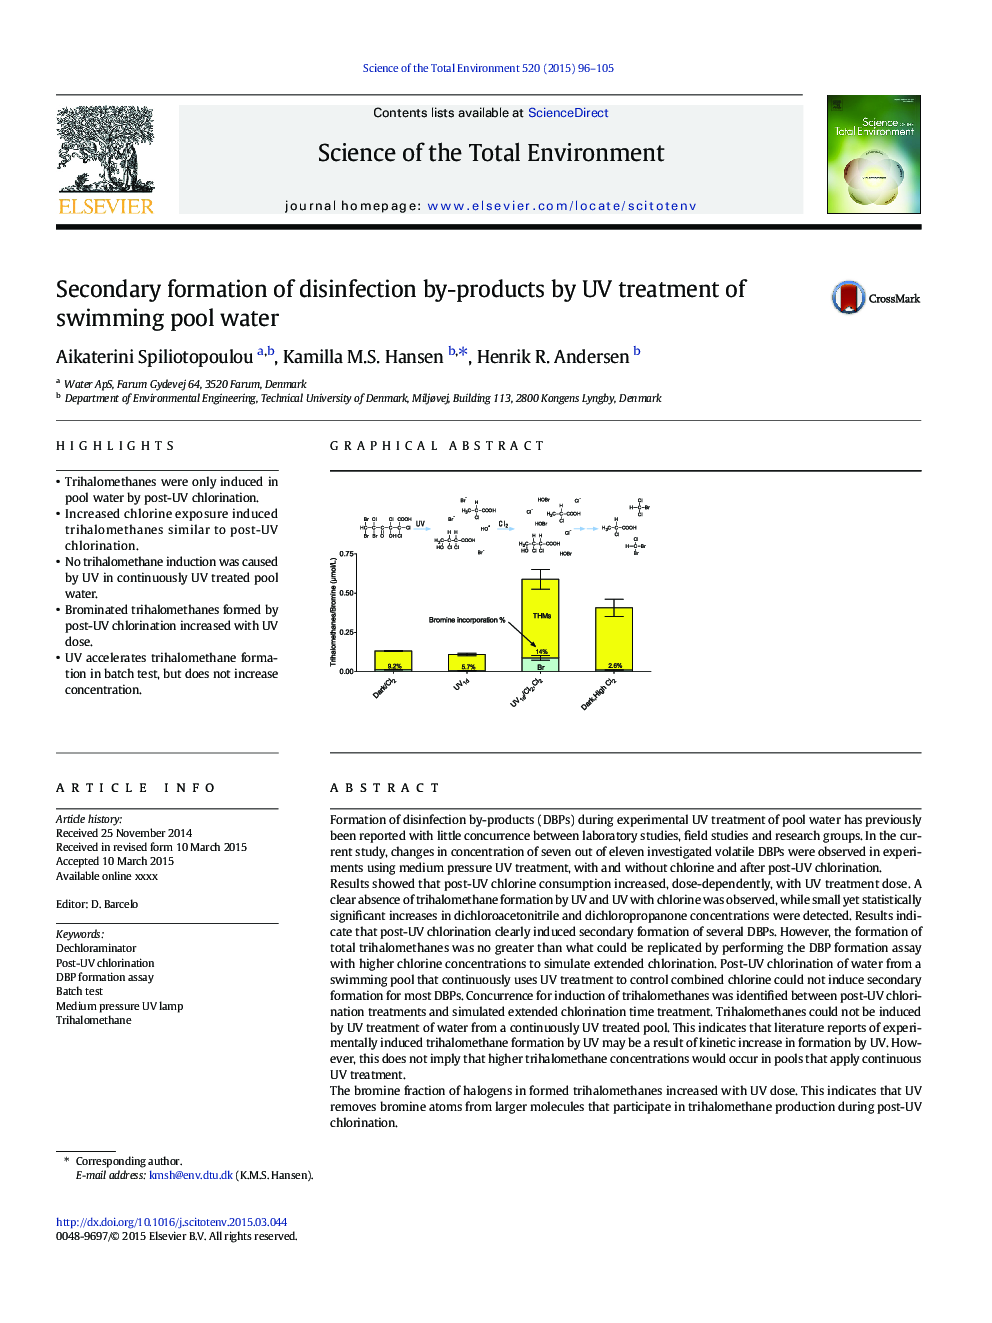 Secondary formation of disinfection by-products by UV treatment of swimming pool water